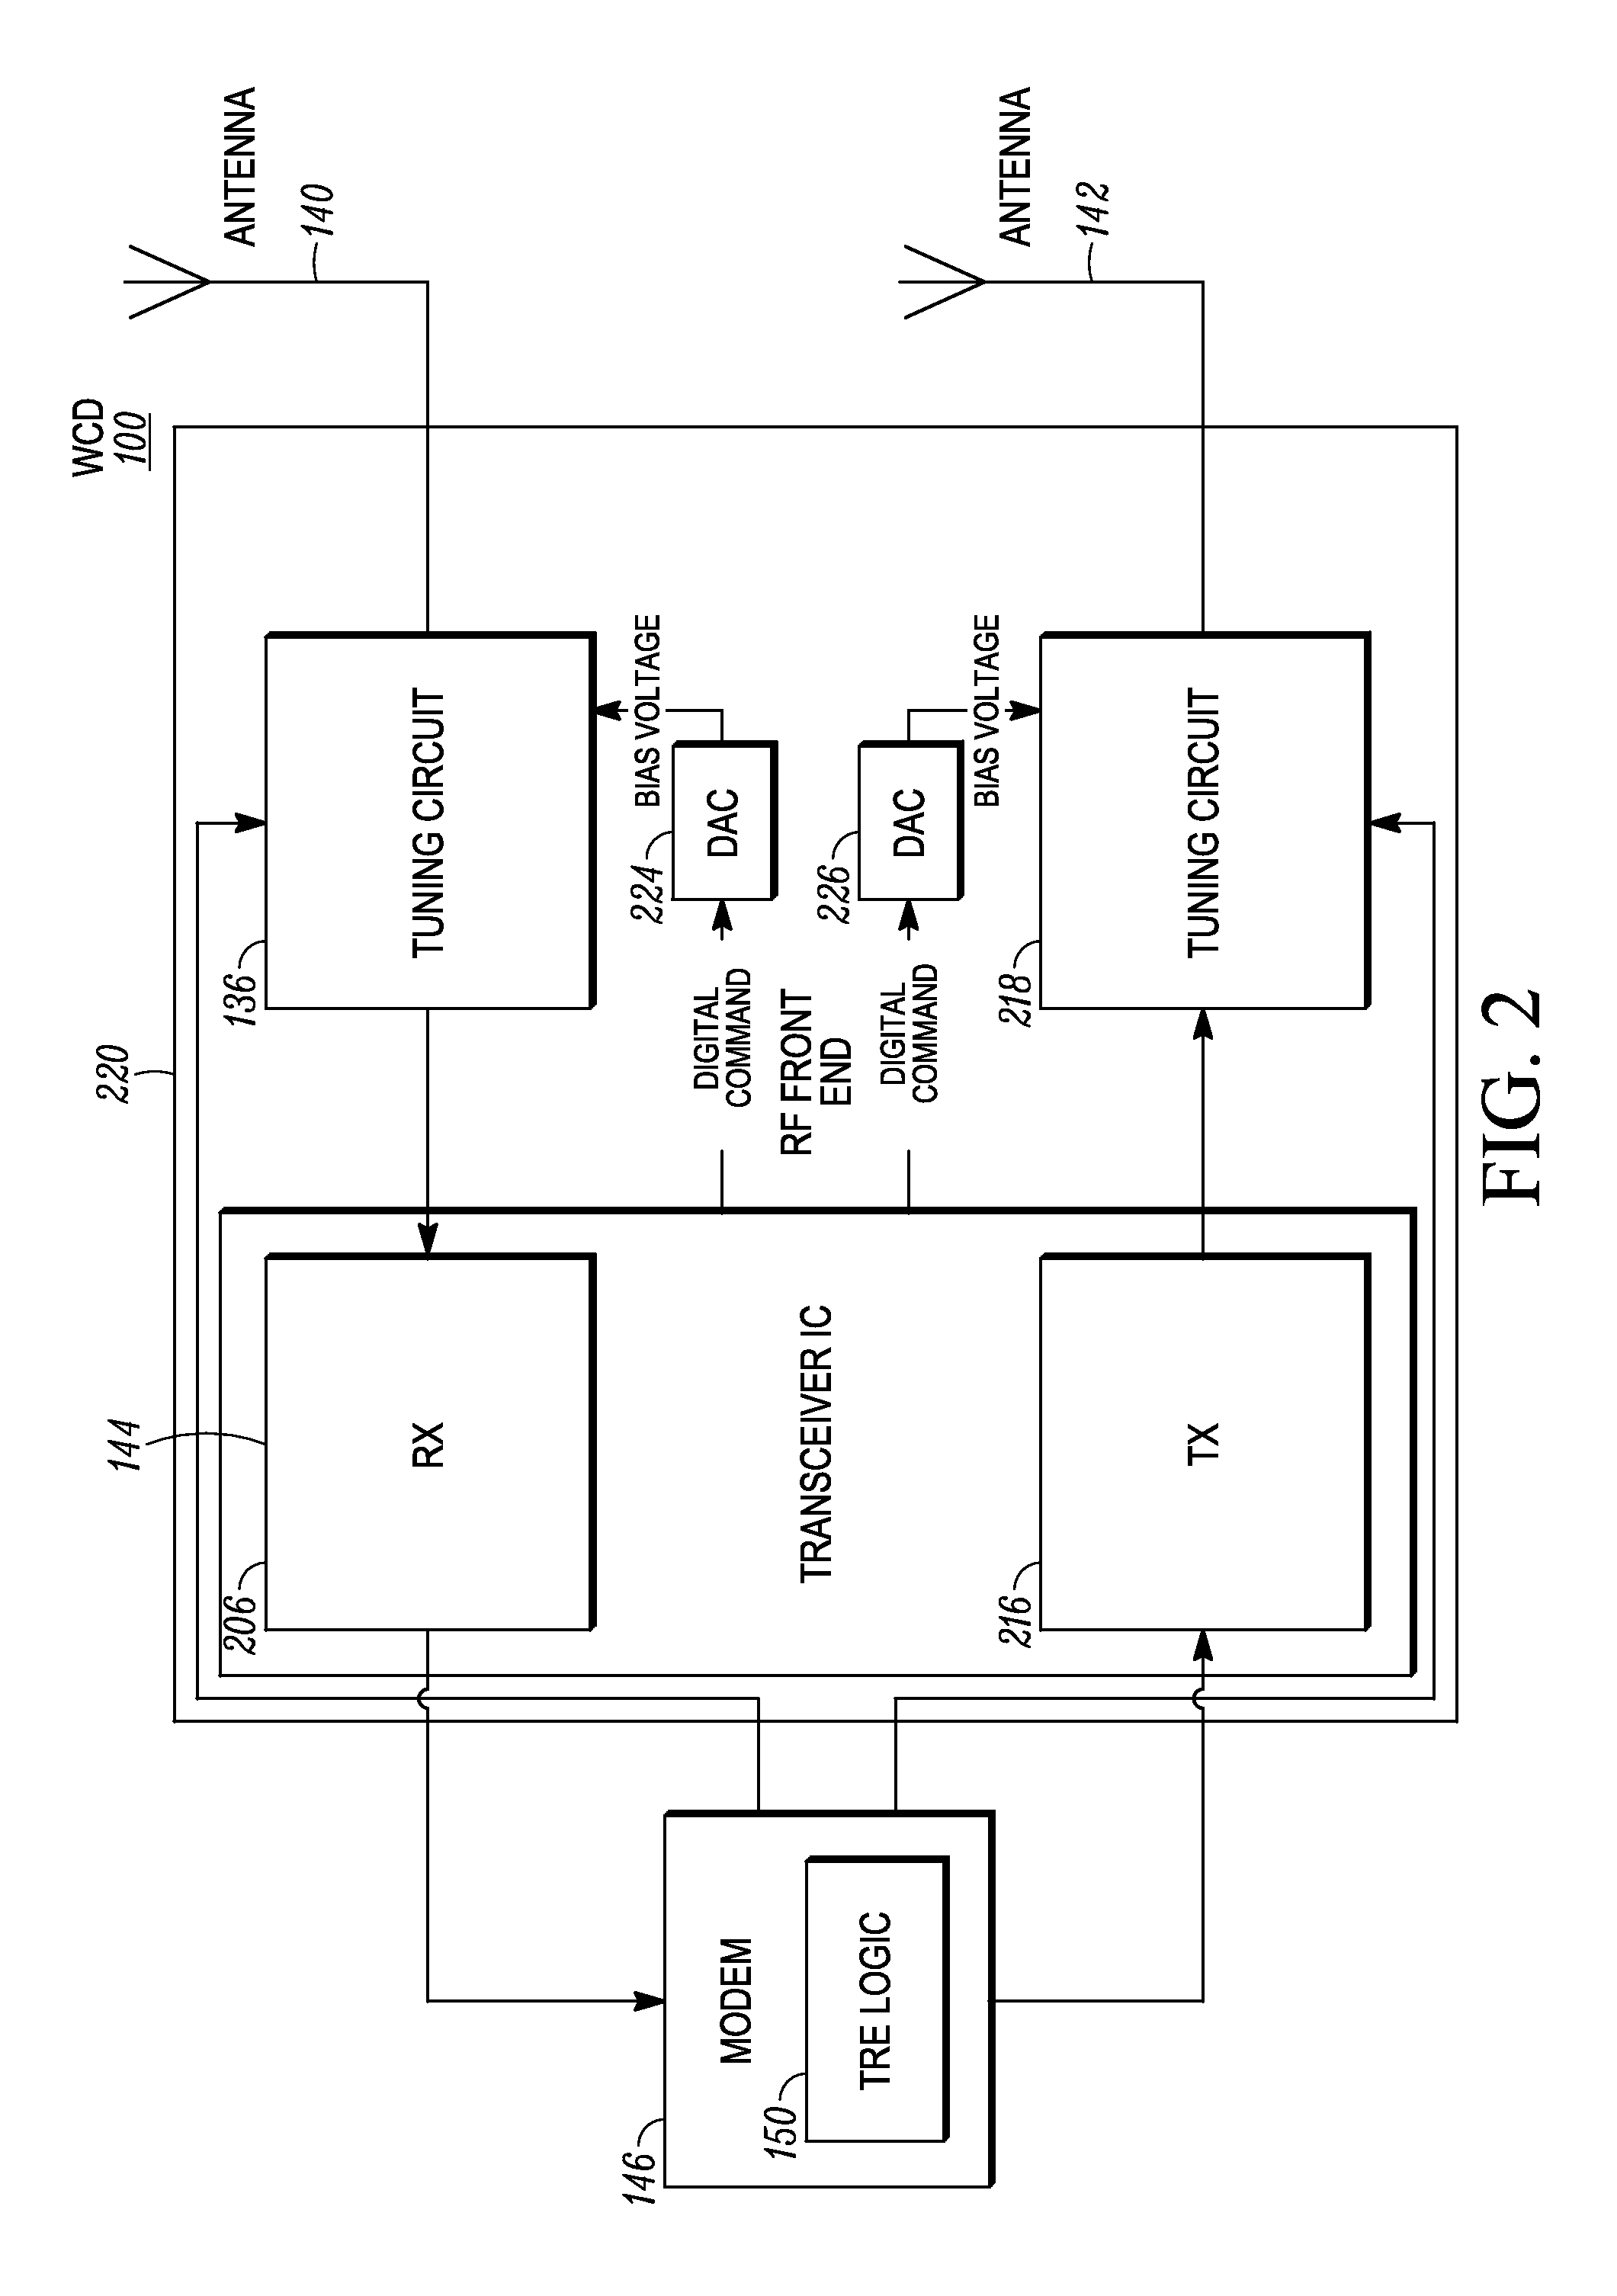 Method and system to improve antenna tuner reliability